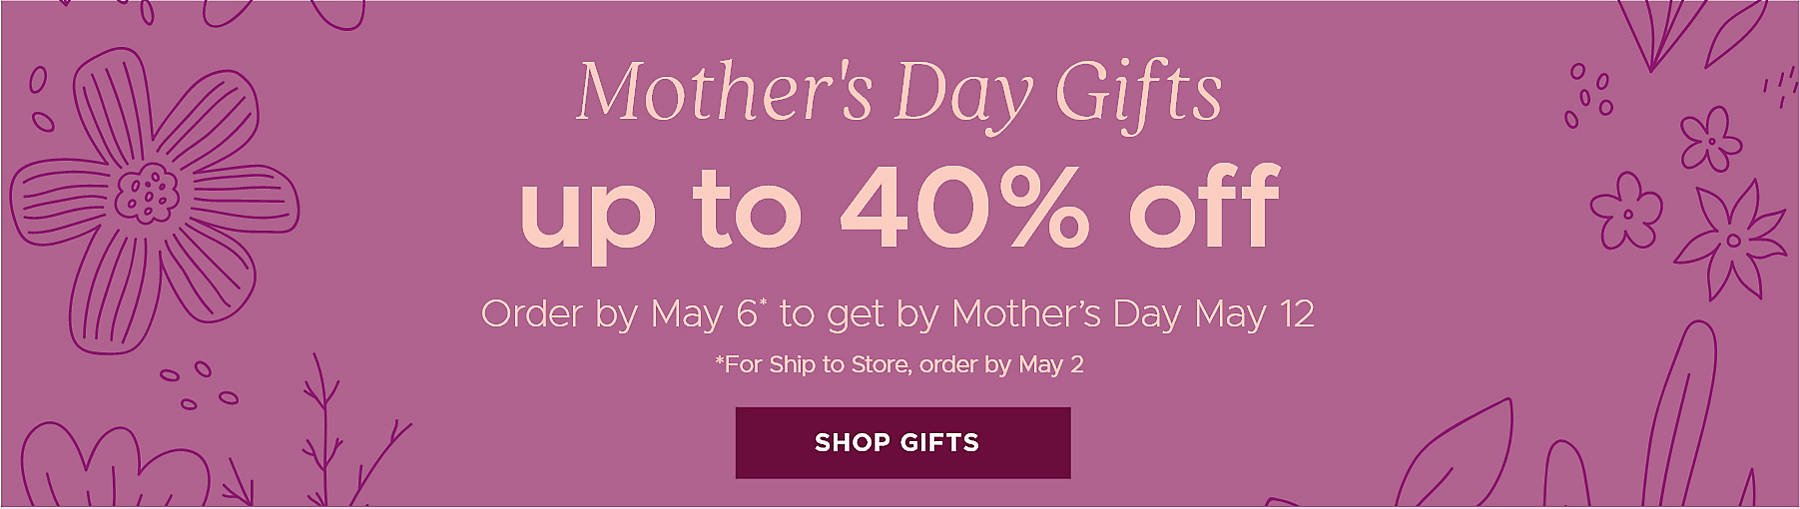 Mother's Day Gifts up to 40% off Order by May 6* to get by Mother's Day May 12 *For Ship to Store, order by May 2 Shop Gifts